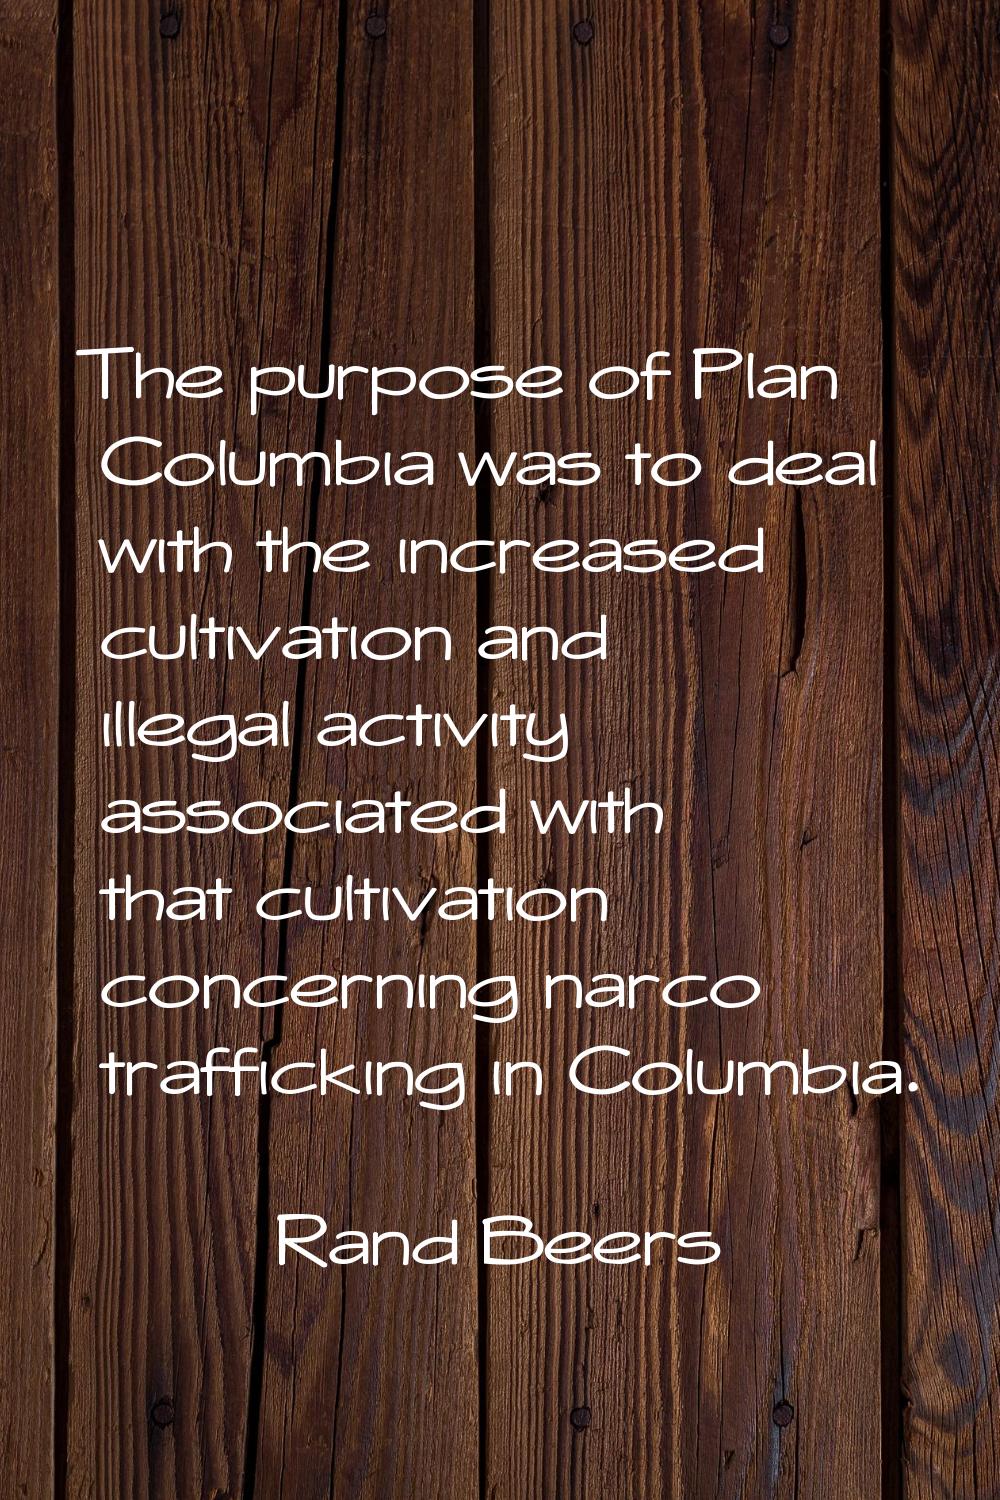 The purpose of Plan Columbia was to deal with the increased cultivation and illegal activity associ